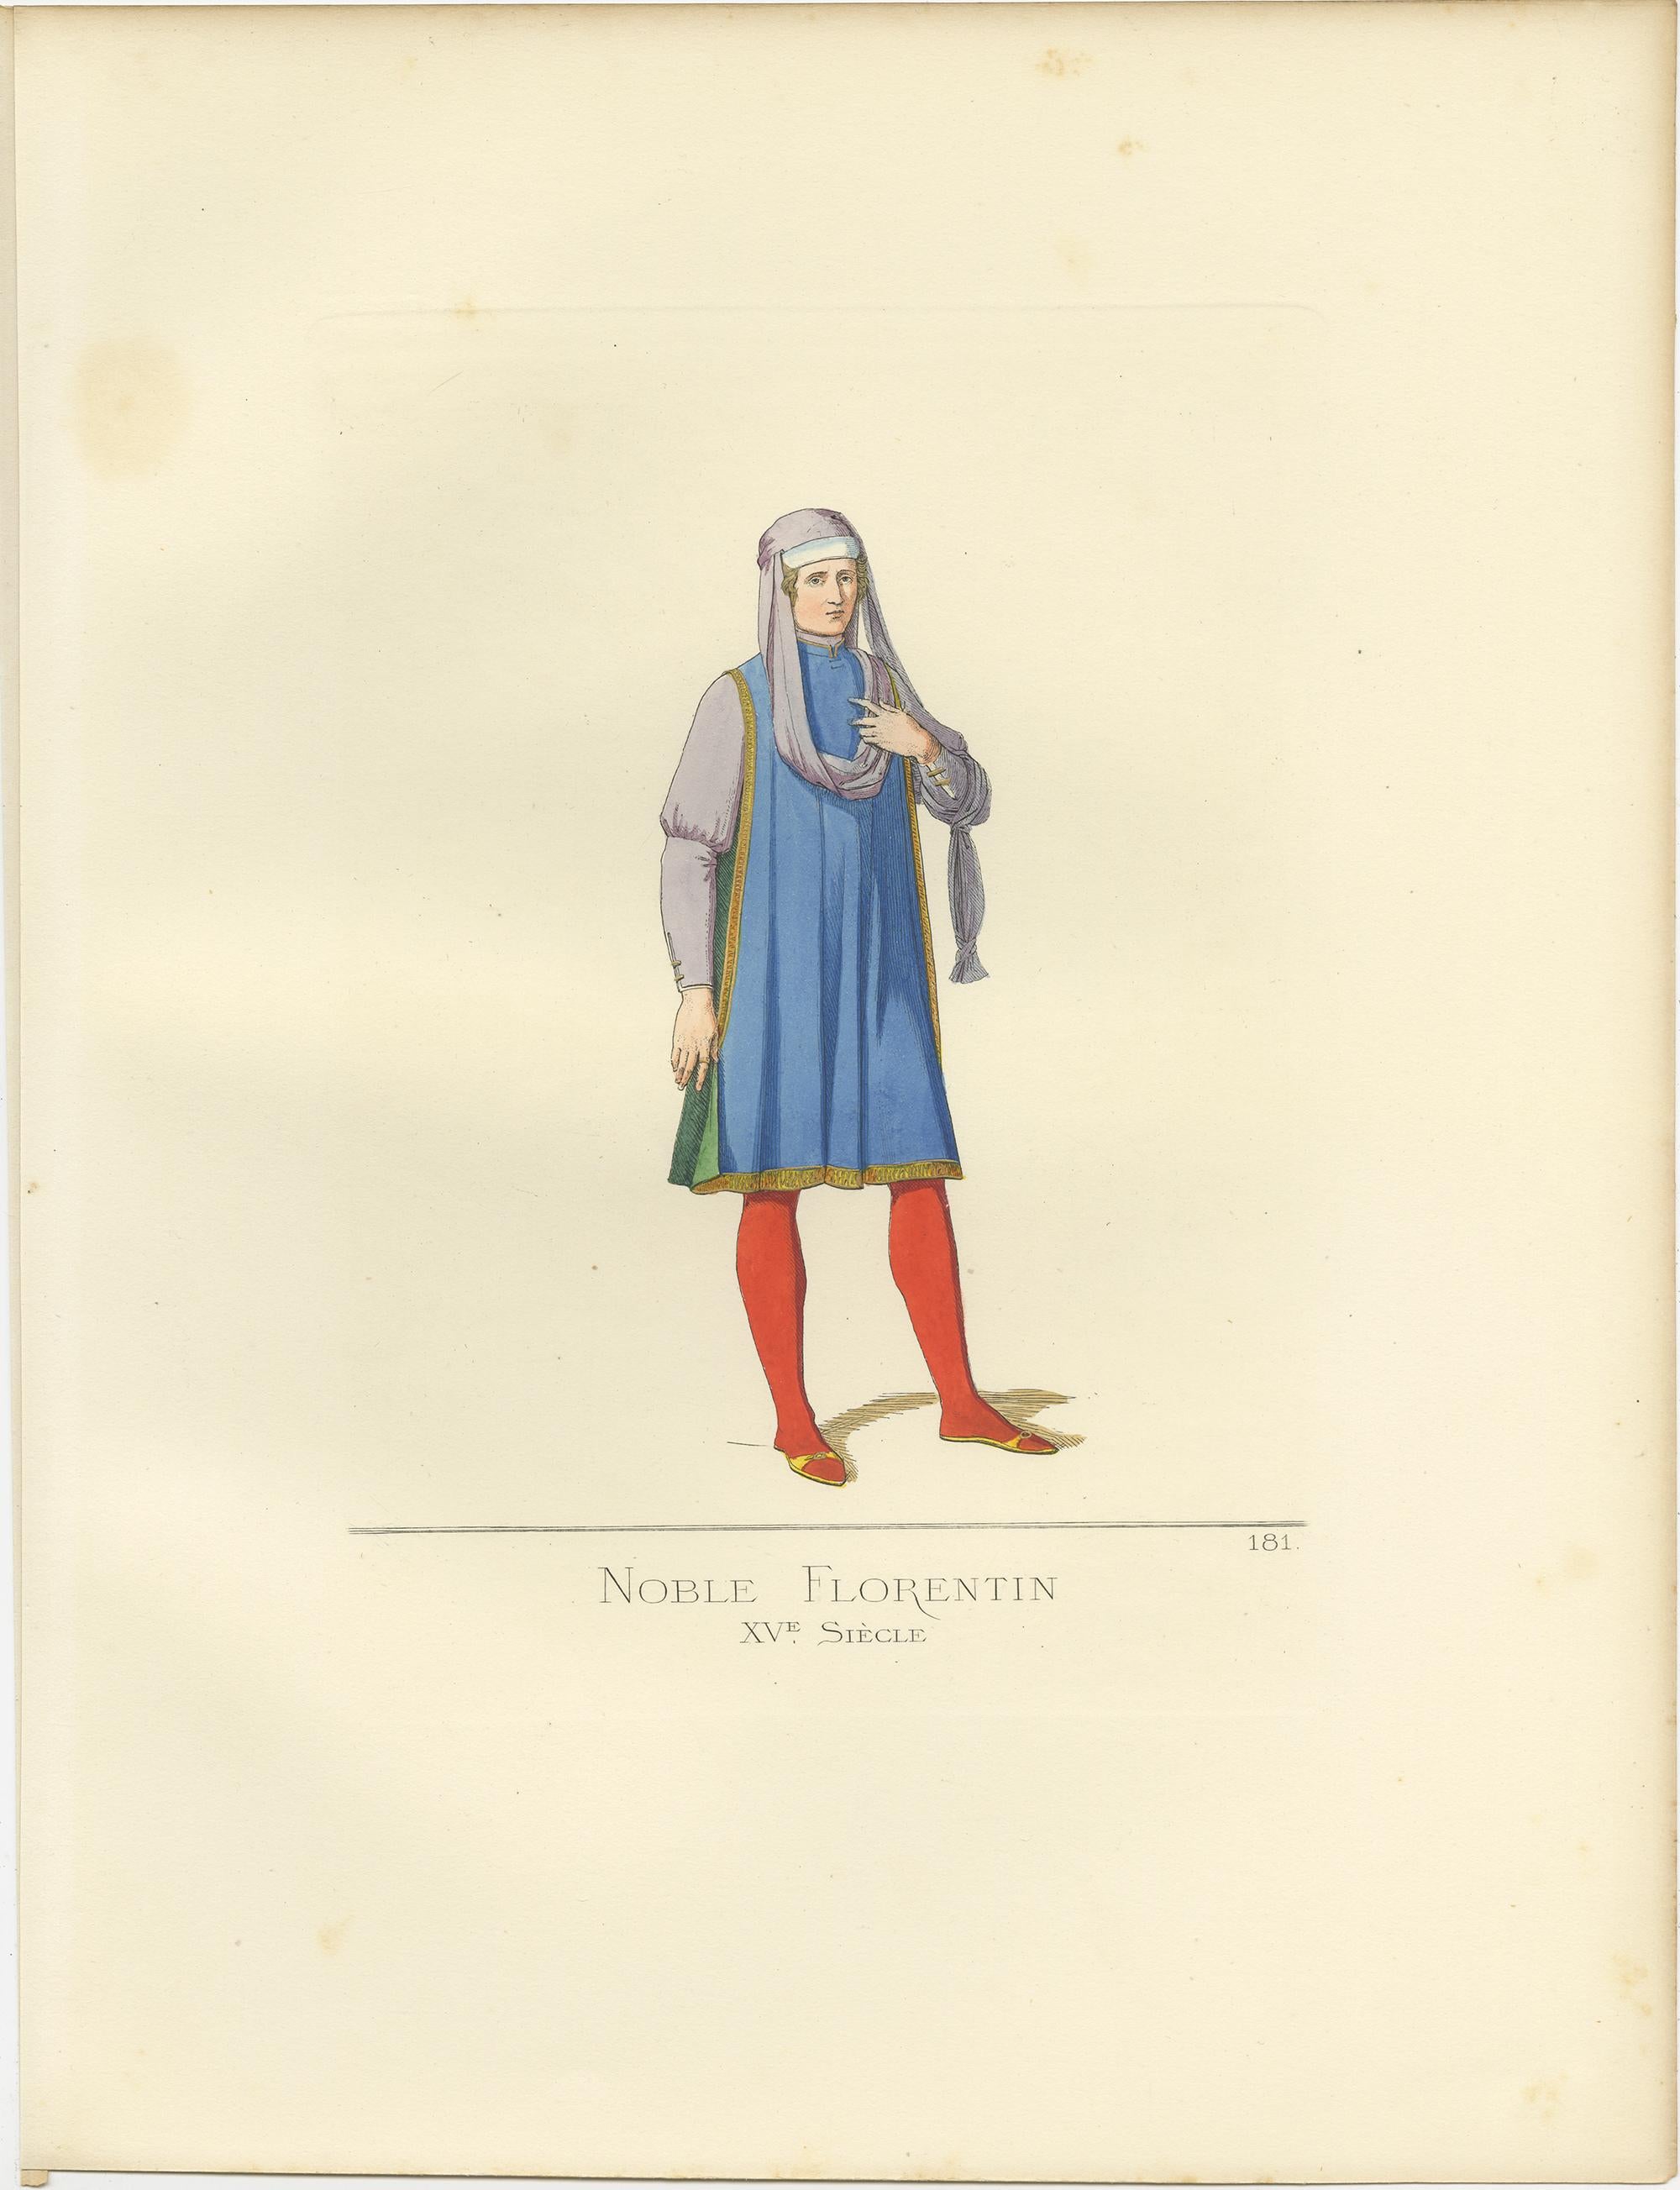 Antique print titled ‘Noble Florentin, XVe Siecle.’ Original antique print of a nobleman from Florence in Italy, 15th century. This print originates from 'Costumes historiques de femmes du XIII, XIV et XV siècle' by C. Bonnard. Published, 1860.